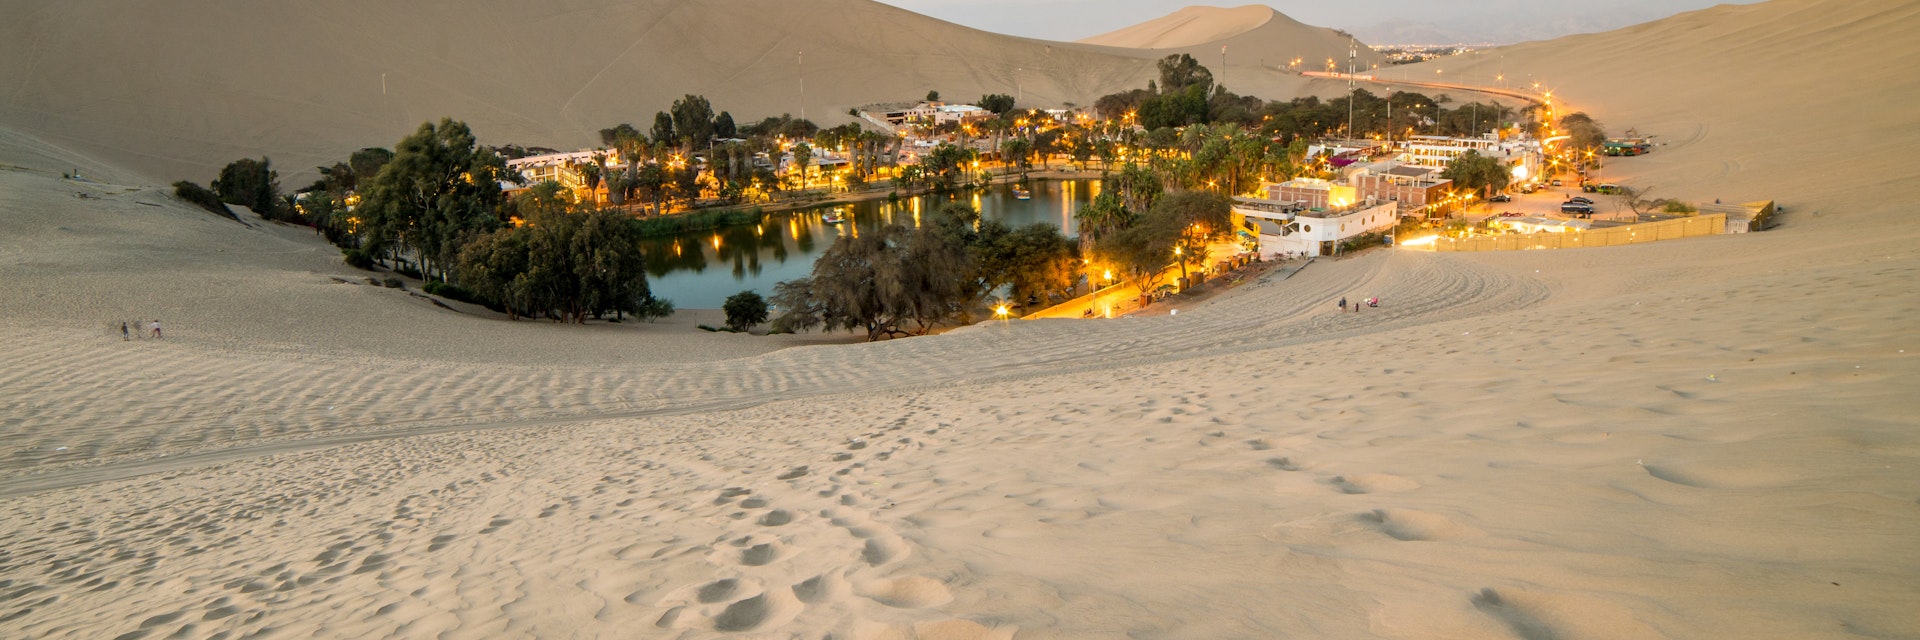 The sand dunes surrounding the small desert oasis of Huacachina at sunset.